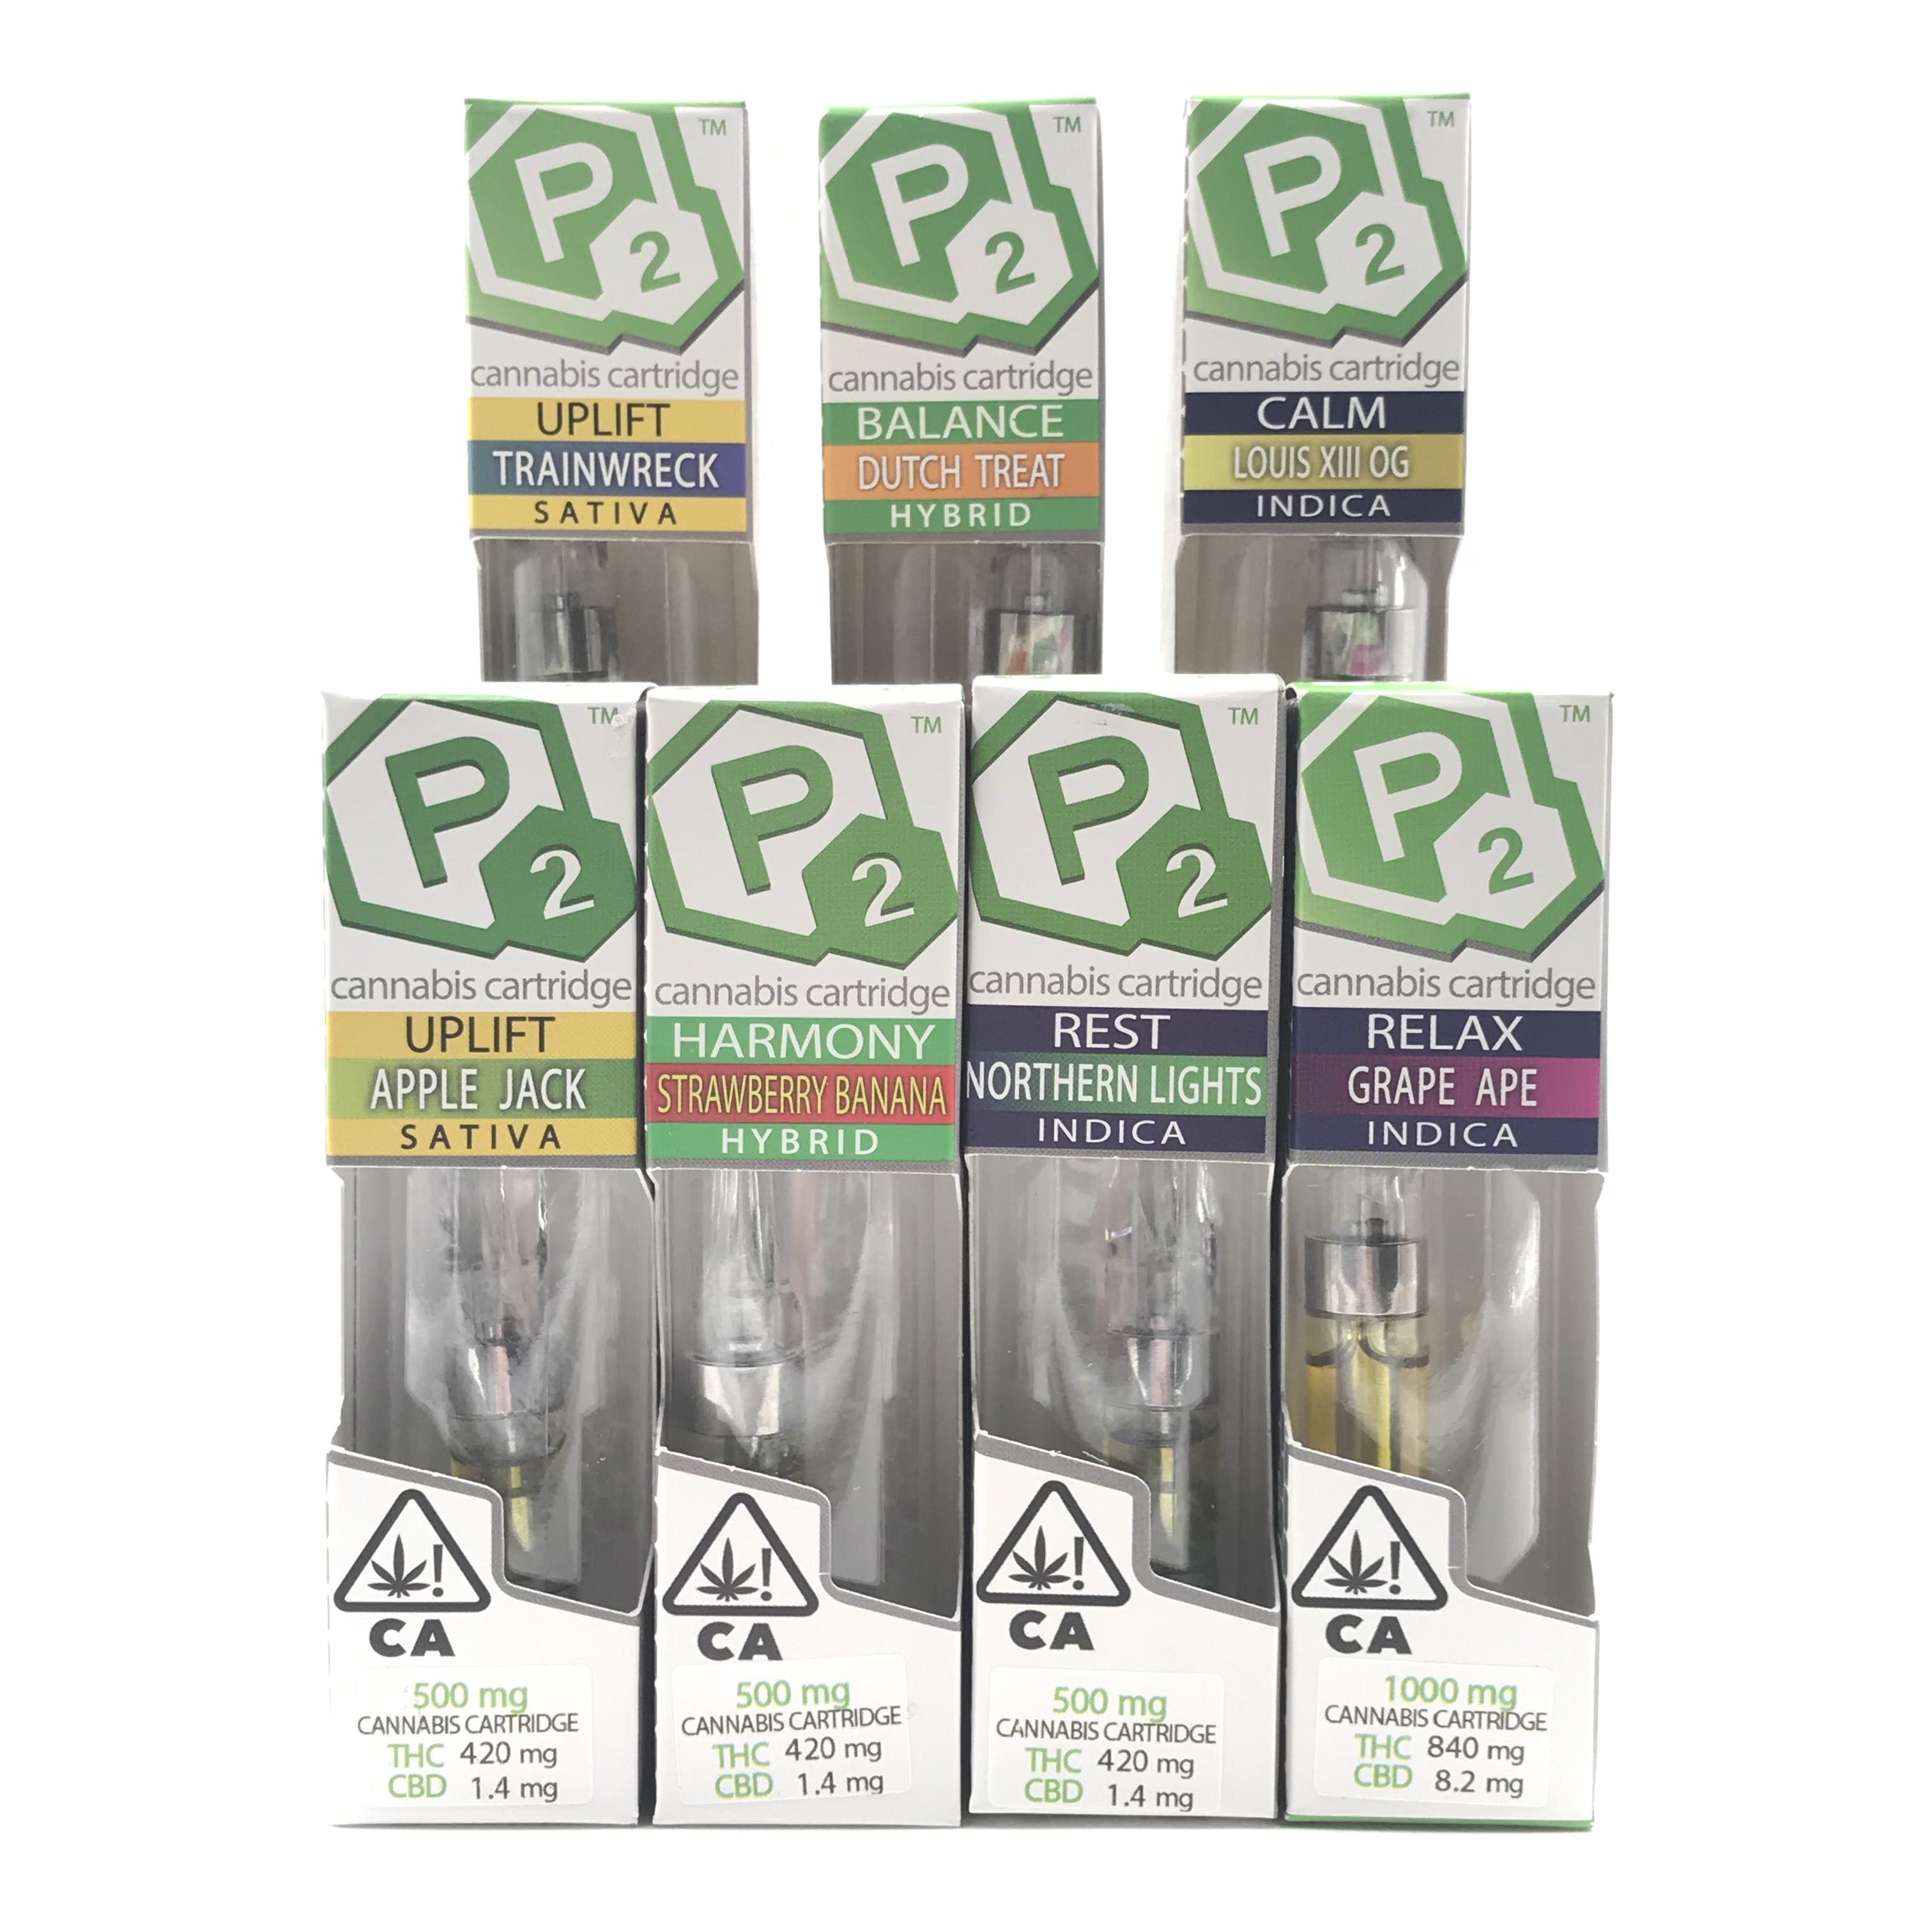 [Carts] Grape Ape (Indica) - P2 Pure Xtracts